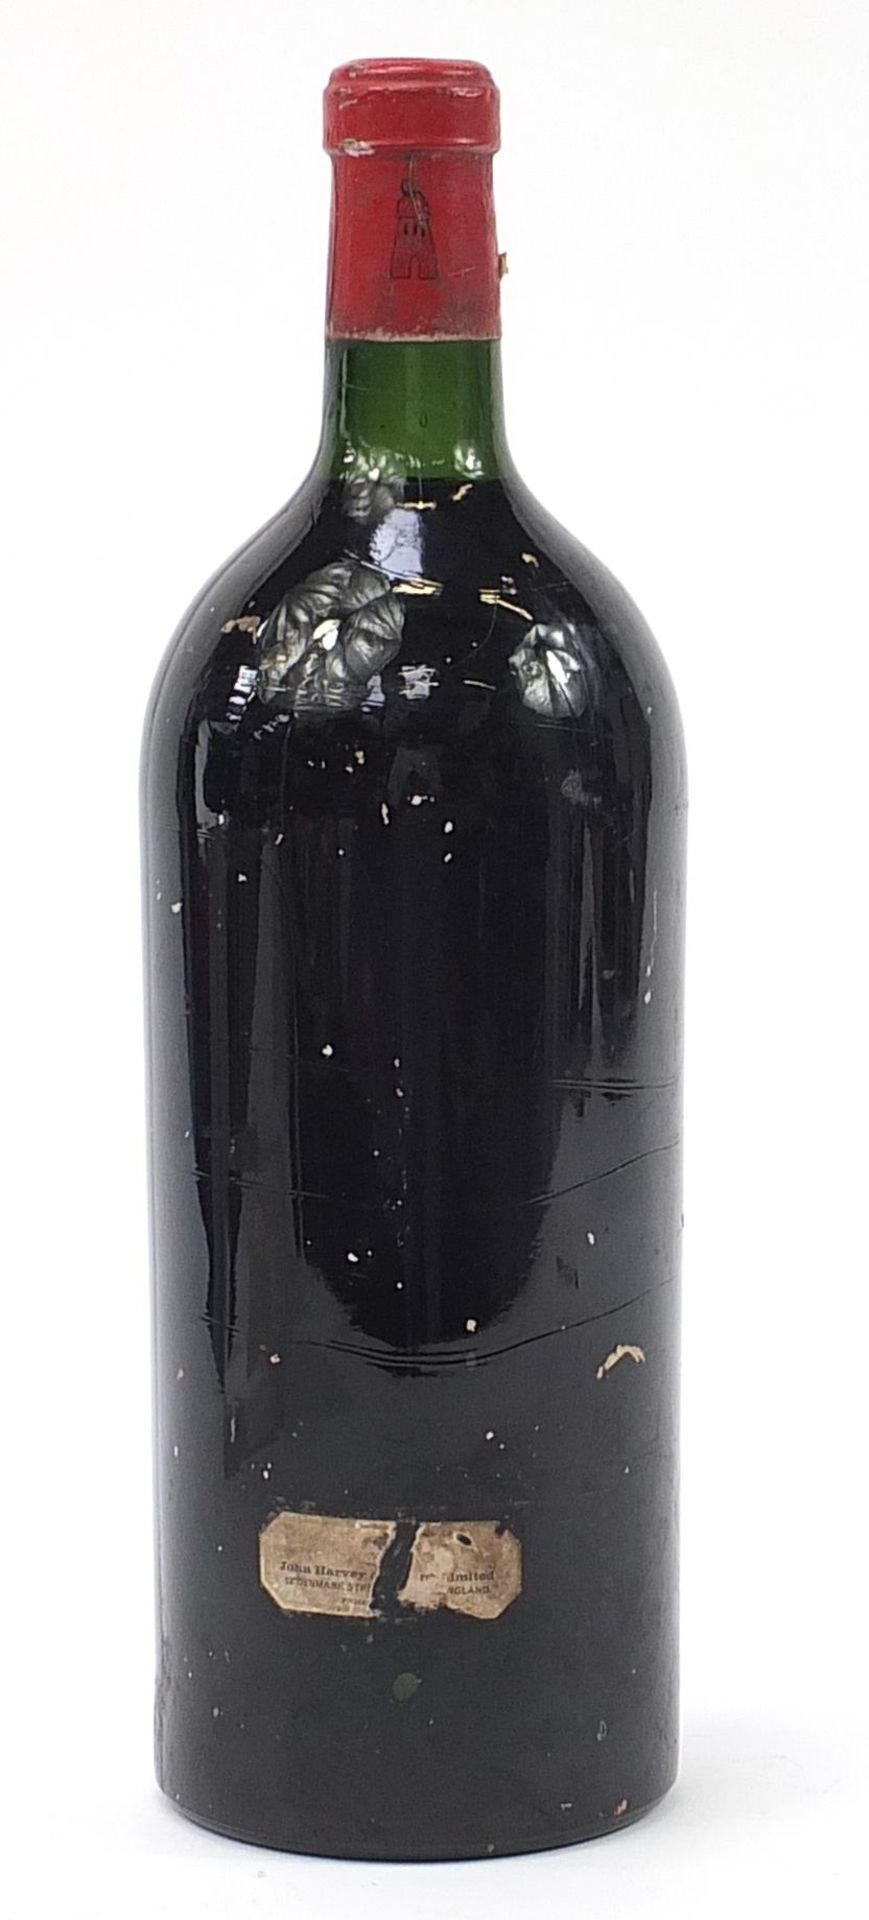 Double-magnum bottle of 1959 Chateau Latour red wine, John Harvey label to the reverse - Image 2 of 6